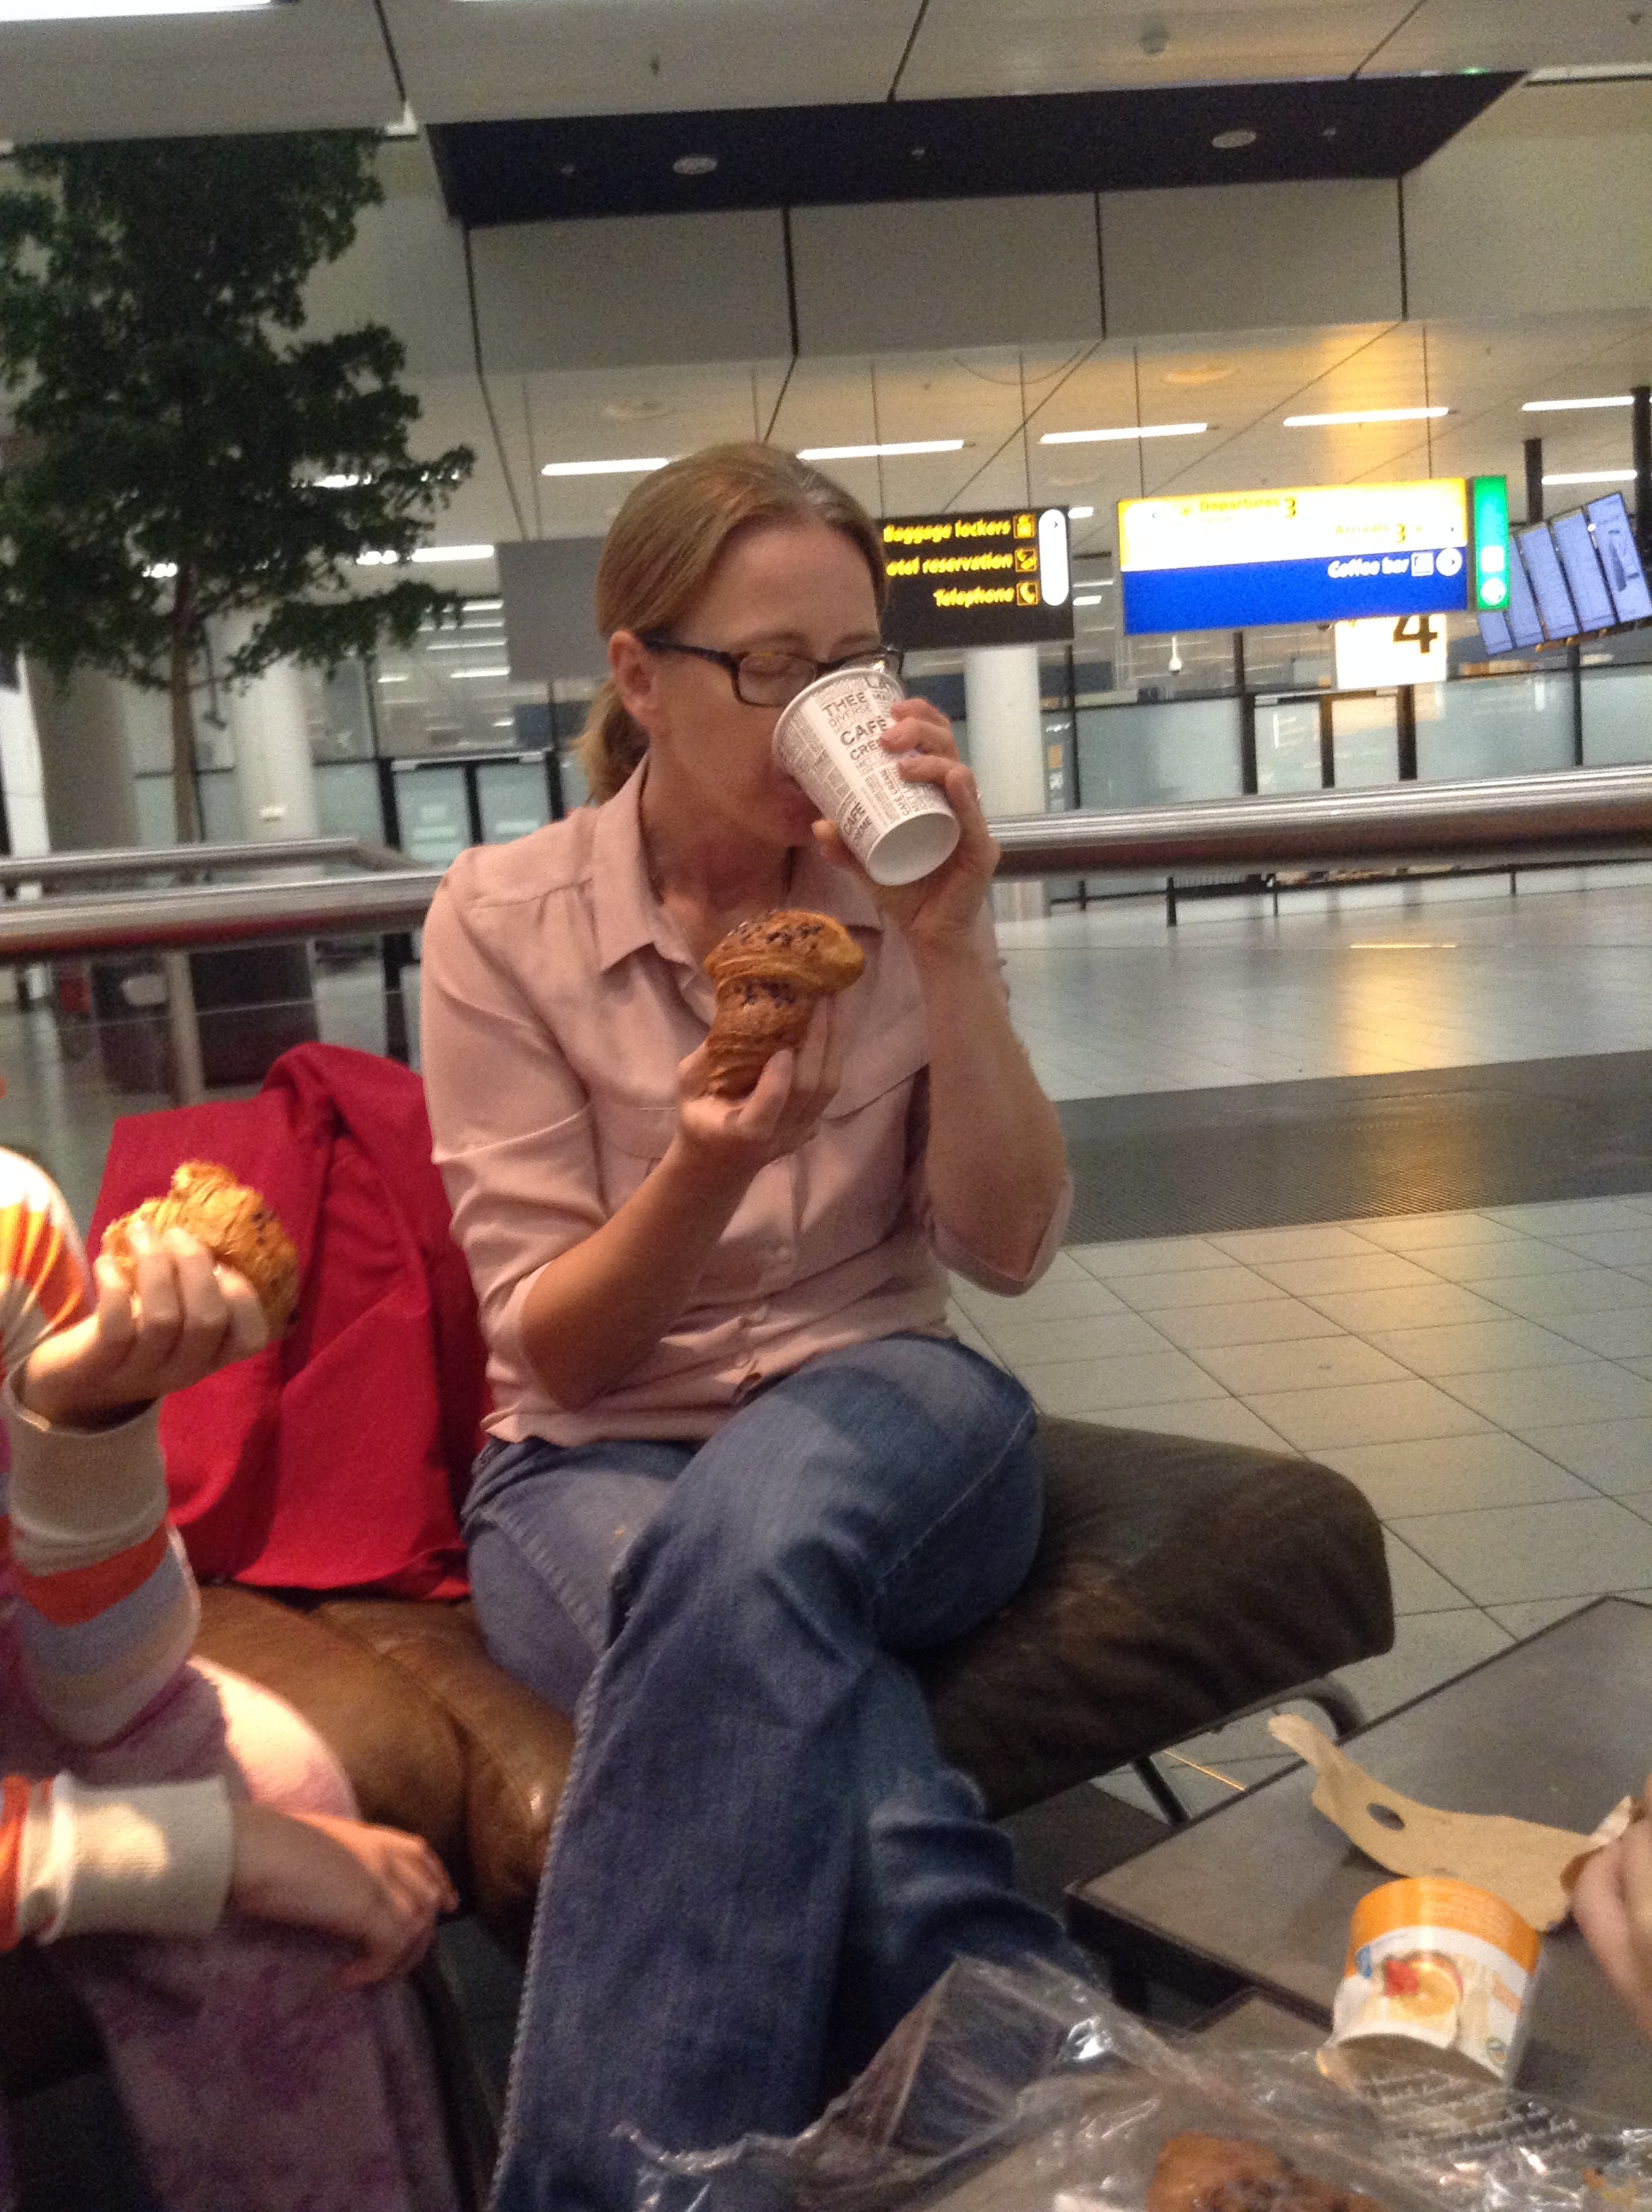 Eating a chocolate croissant and coffee in the Amsterdam airport: an unusual homeschool Christmas treat